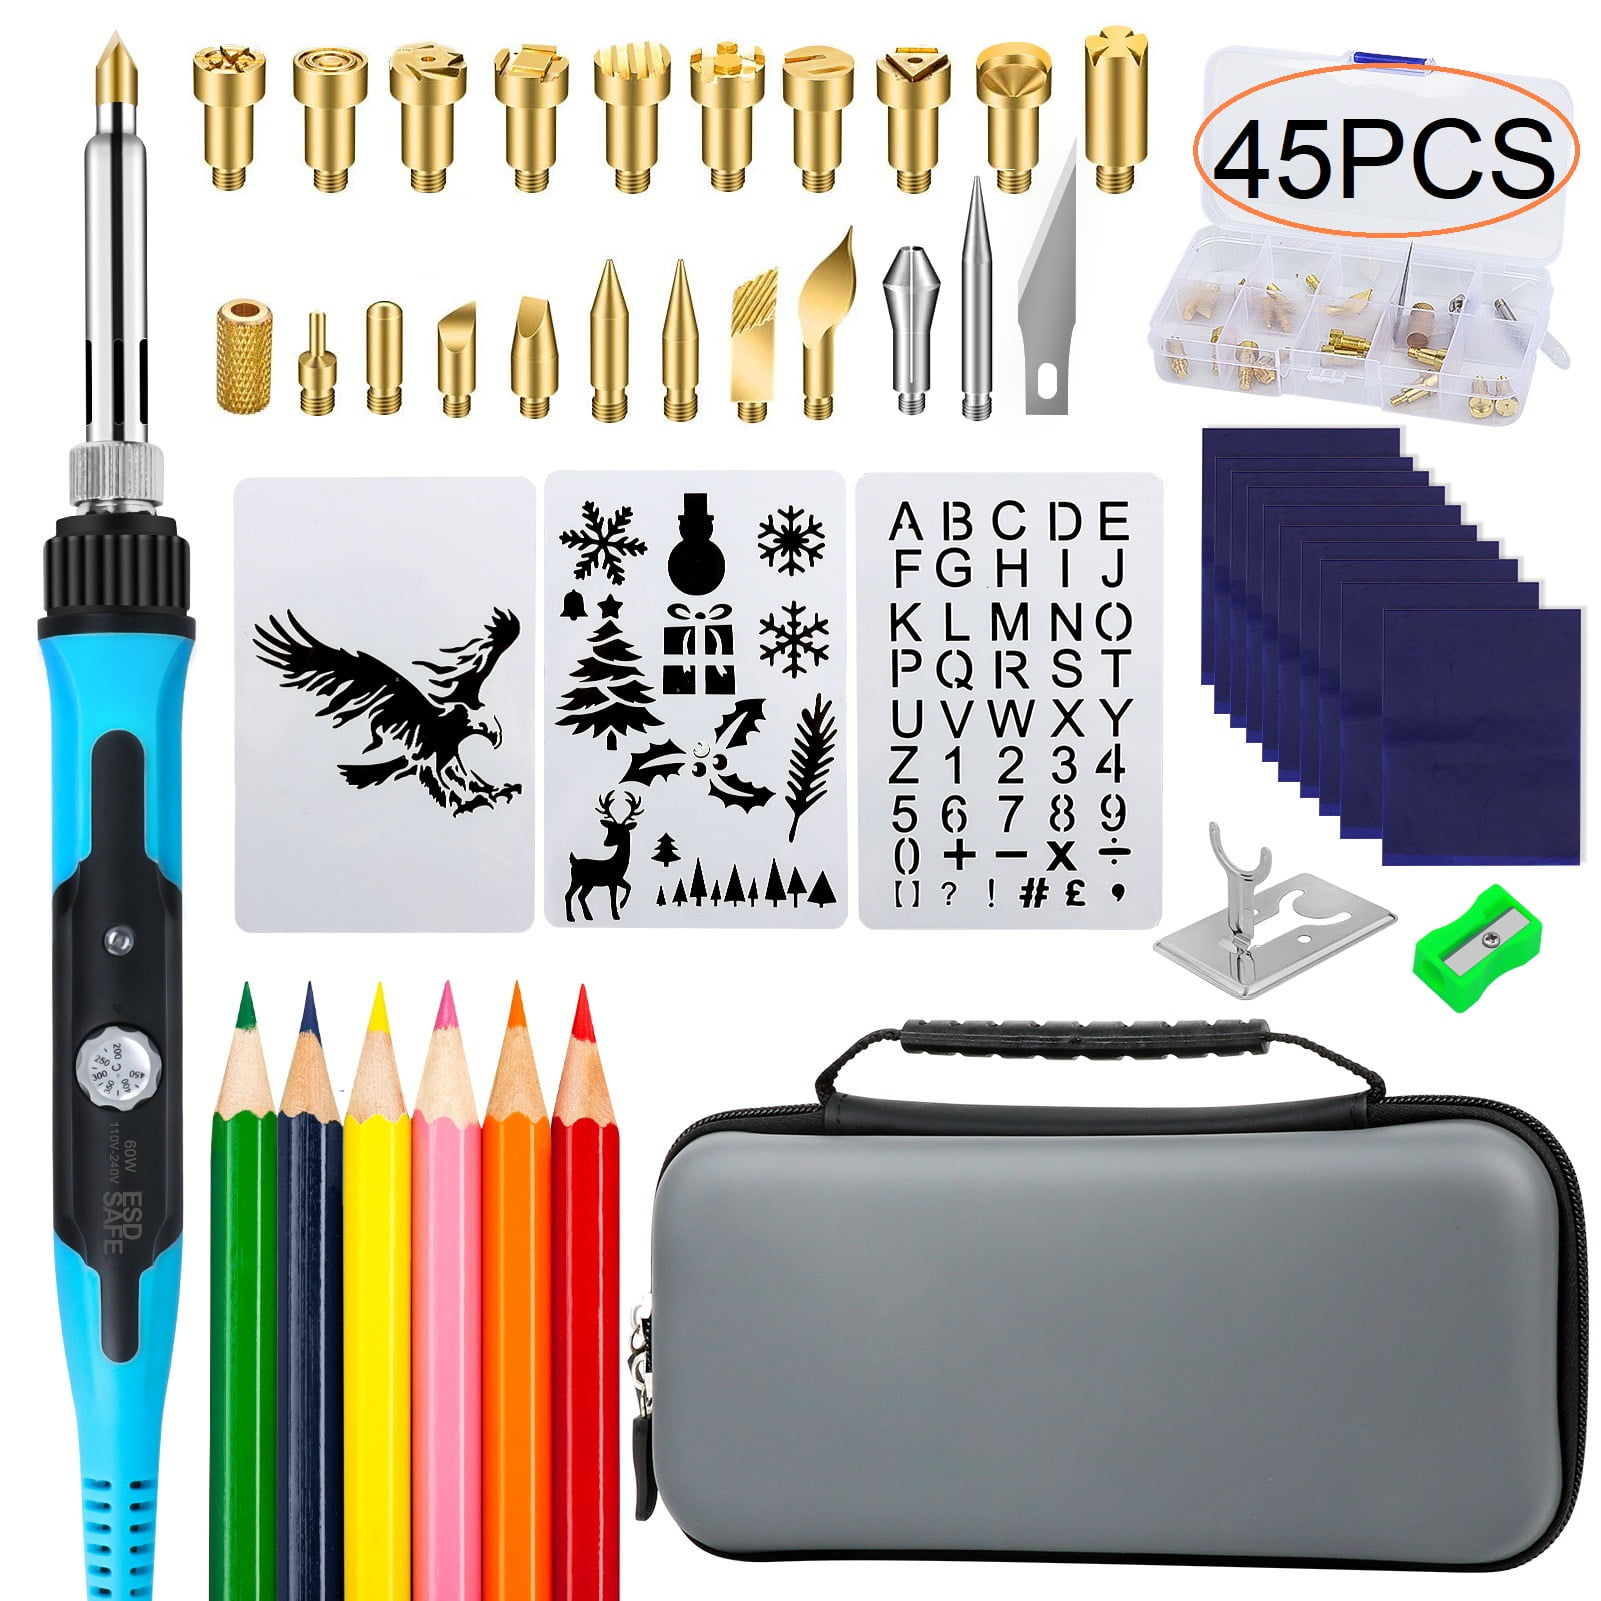 Wood Burning Kit 45pcs, Adjustable Temperature 200~420, Professional Craft Tool Set for Beginners Adults and DIY Carving (Yellow)